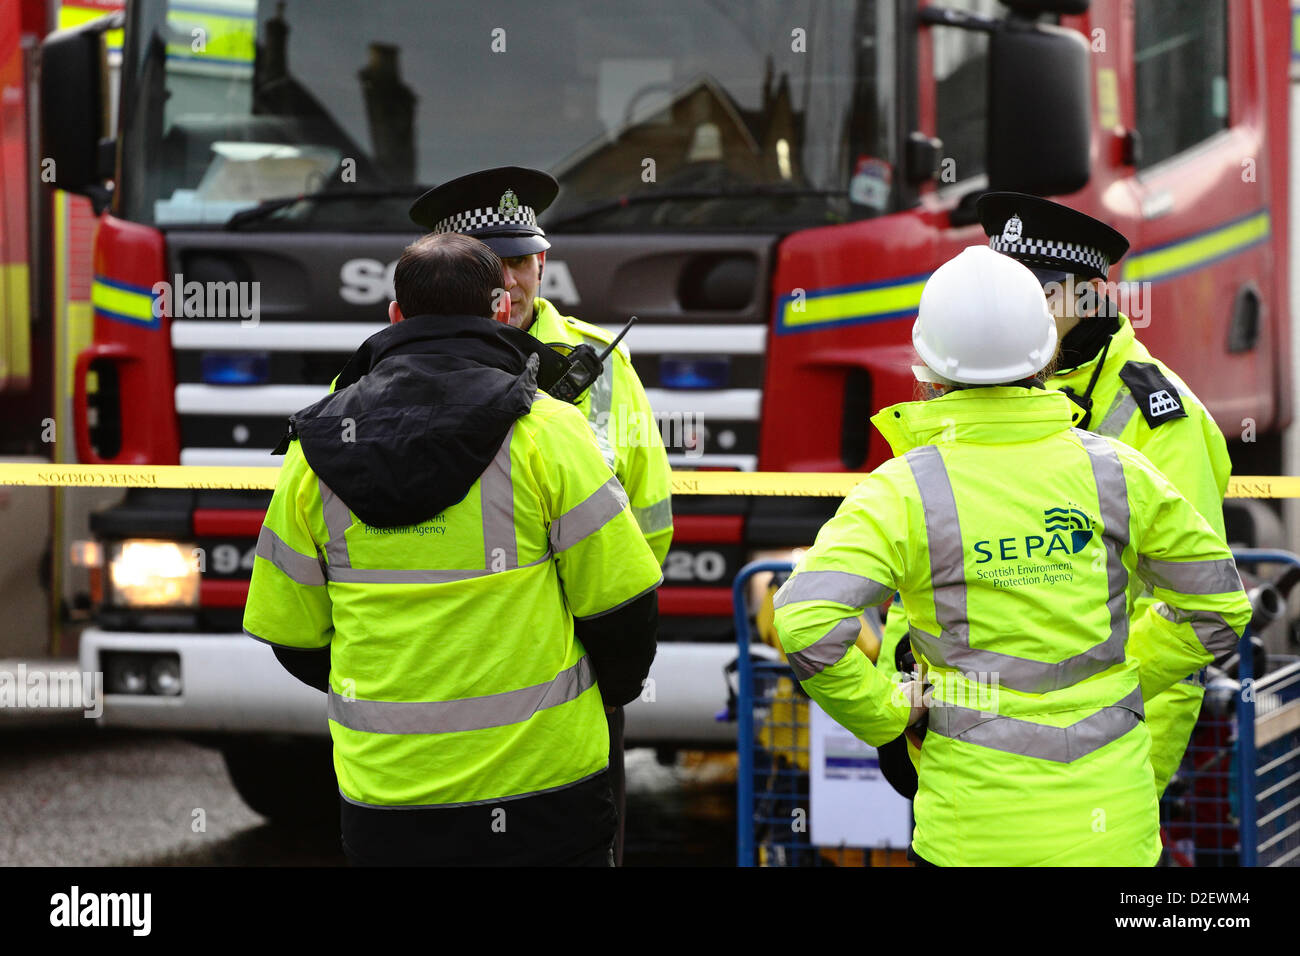 Johnstone, Renfrewshire, Scotland, UK, Tuesday, 22nd January, 2013. Members of staff from the Scottish Environment Protection Agency (SEPA) in discussion with two Policemen on duty at the entrance to the WRC Recycling Plant where a fire caused cancellations, delays and revisions to the train services on the line between Glasgow Central and Ayr Stock Photo